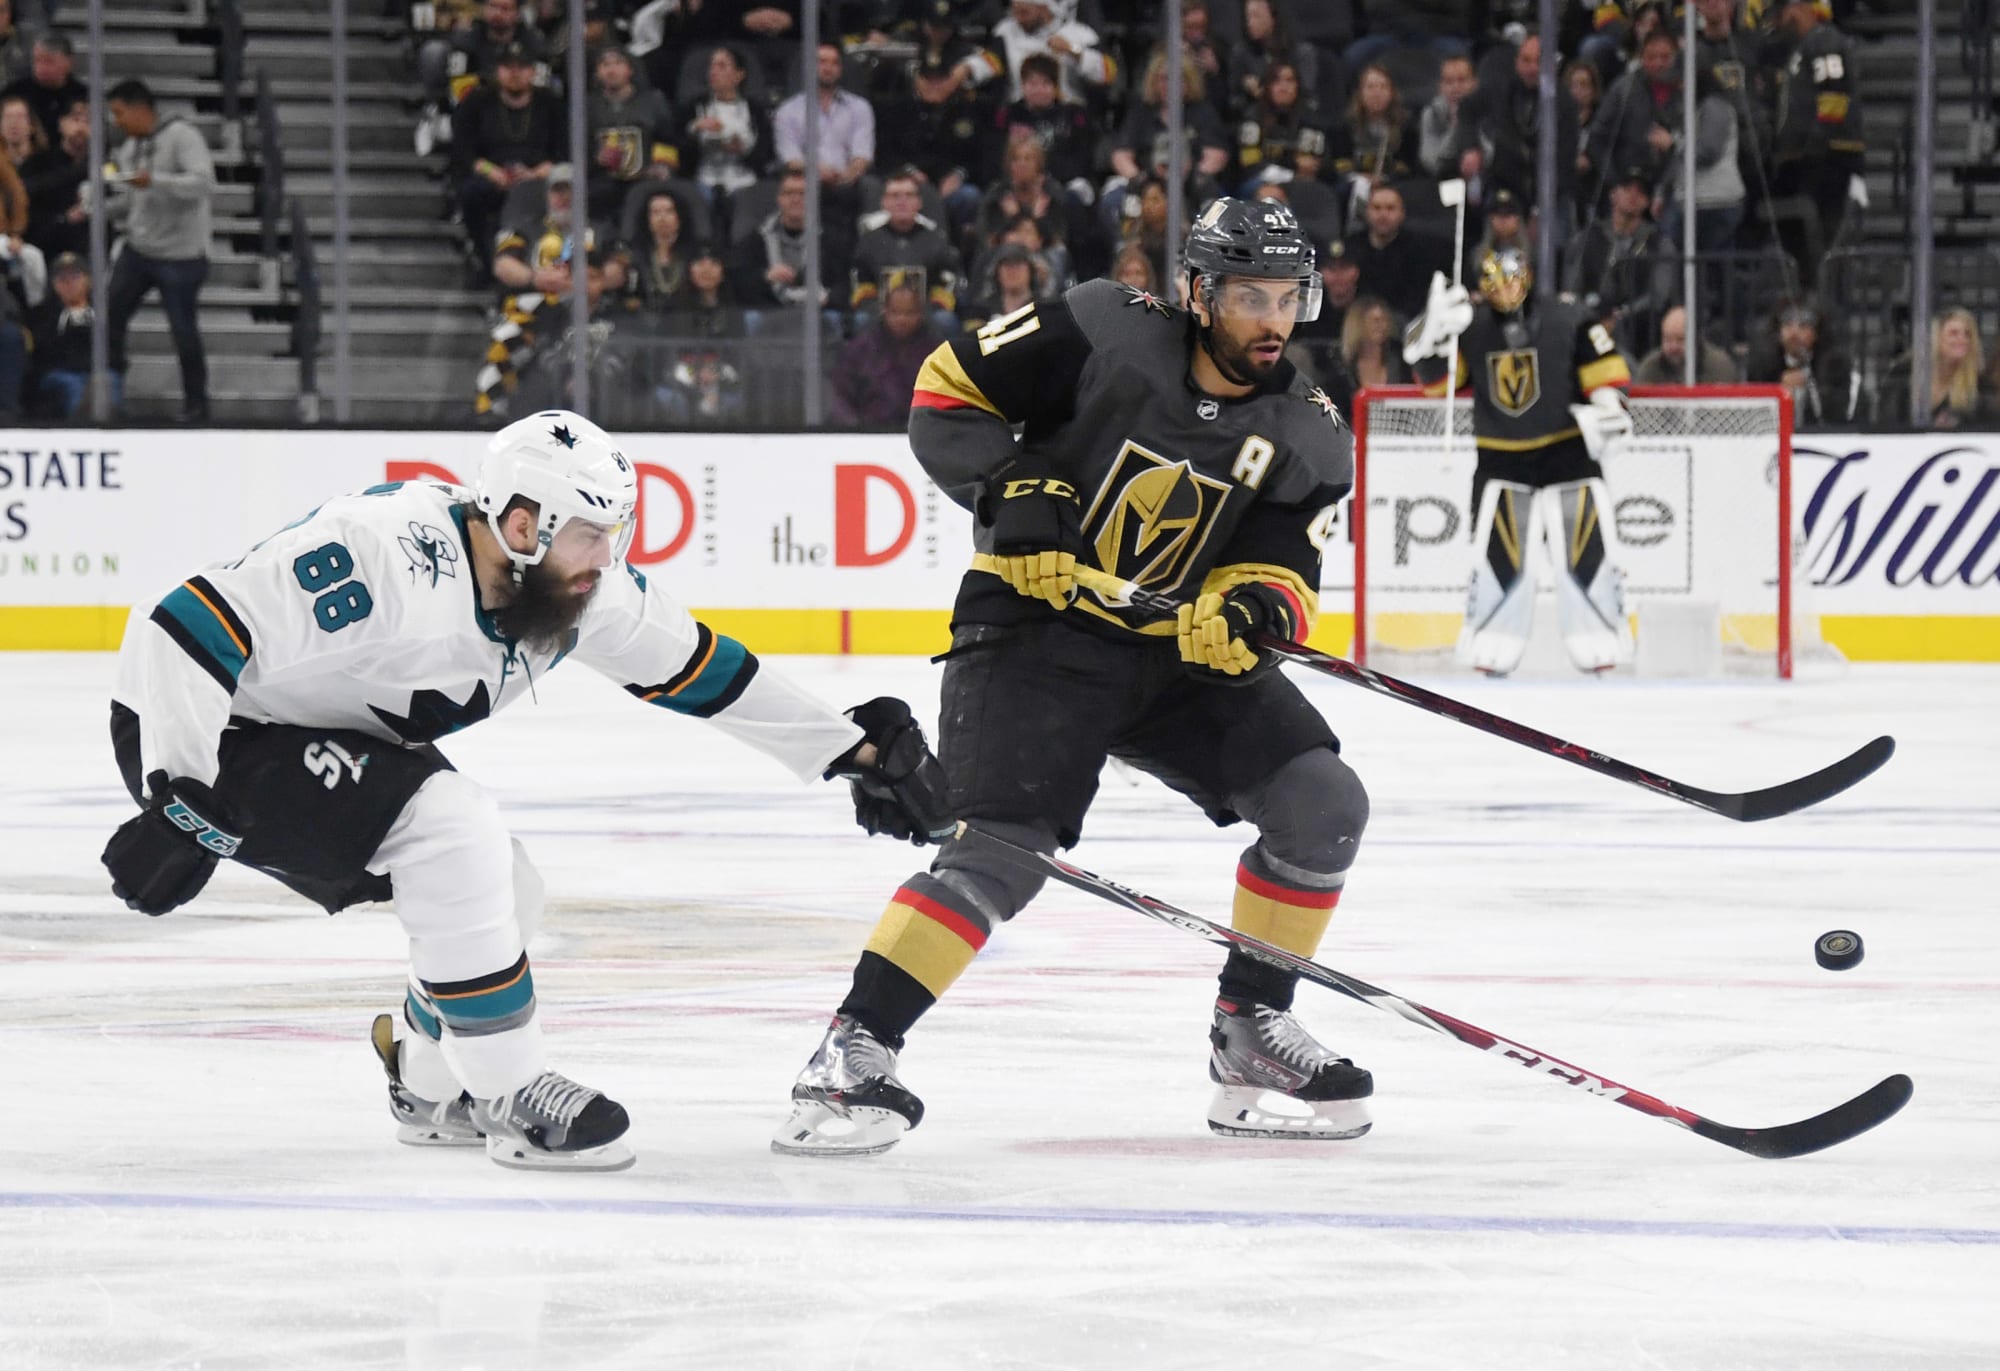 Vegas Golden Knights: Glass hungry to improve ahead of sophomore season